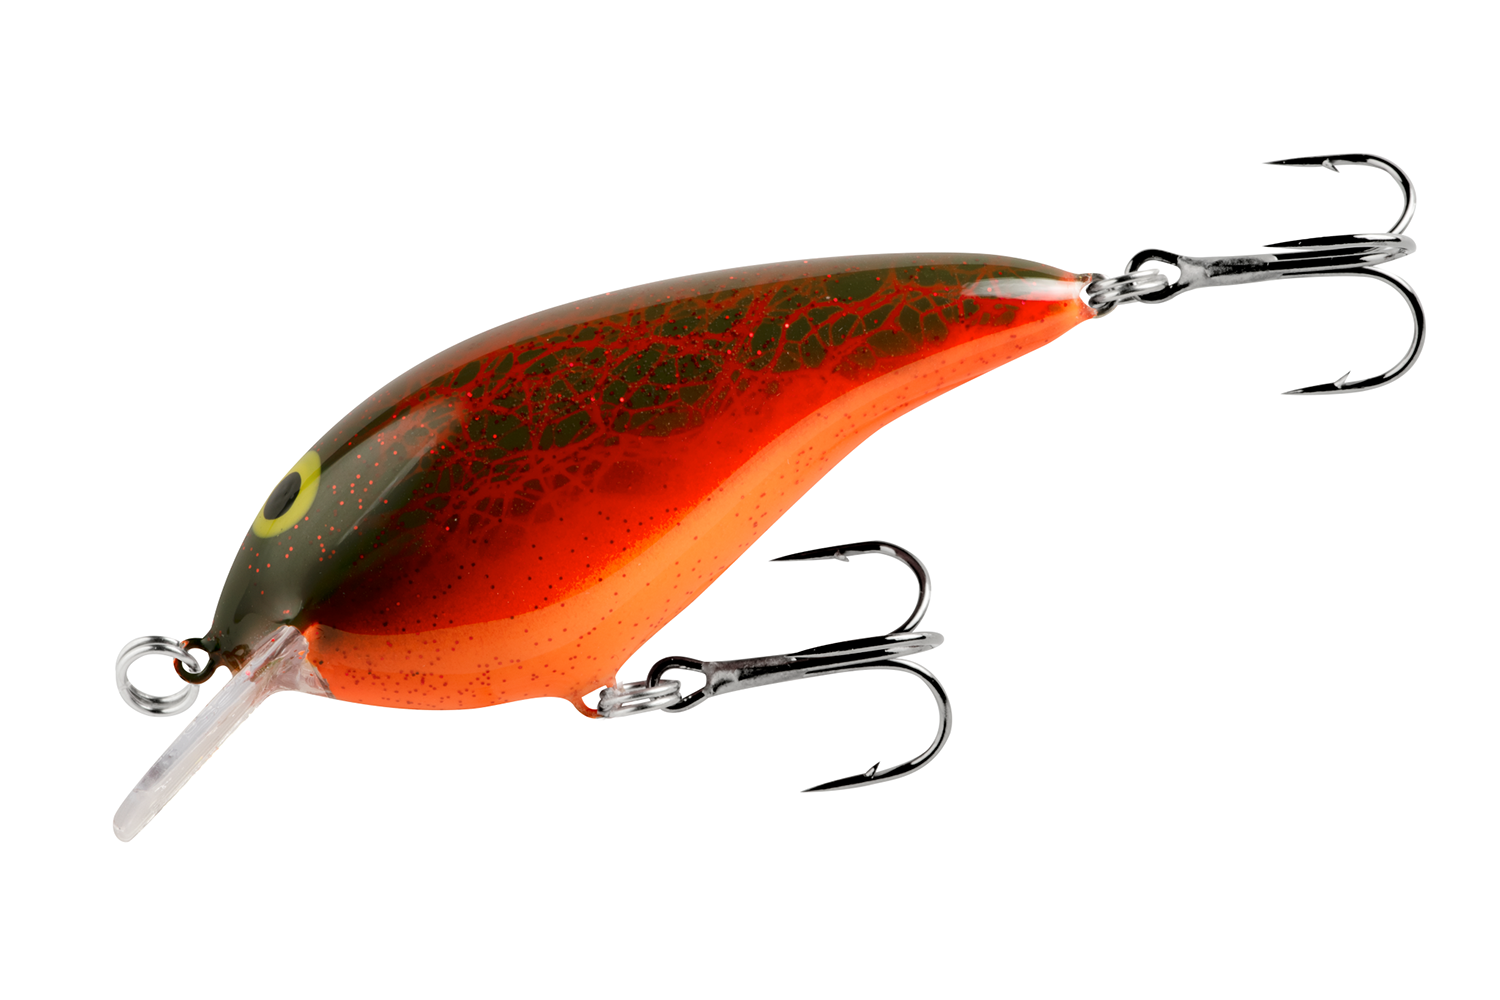 <p><b>Norman Speed N</b></p>
<p>The Norman Speed N fits a gap in the Norman crankbait line that was sorely needed, a prespawn shallow crankbait with a tight wobble to entice weary cold-water bass. The Speed N was created by ex-Elite Series pro Frank Scalish who is a renowned crankbait guru. Scalish wanted a shallow crankbait with a tight wobble for fishing over grass flats, cranking rocks and shallow wood during the early pre spawn period. The body is made from the classic butyrate plastic that provides such a unique rattle with the internal lead weight and combine that with the legendary gel coat paint schemes from Norman for a crankbait nothing like bass have ever seen before. Available in 10 Norman exclusive color patterns.</p>
<p><a href=